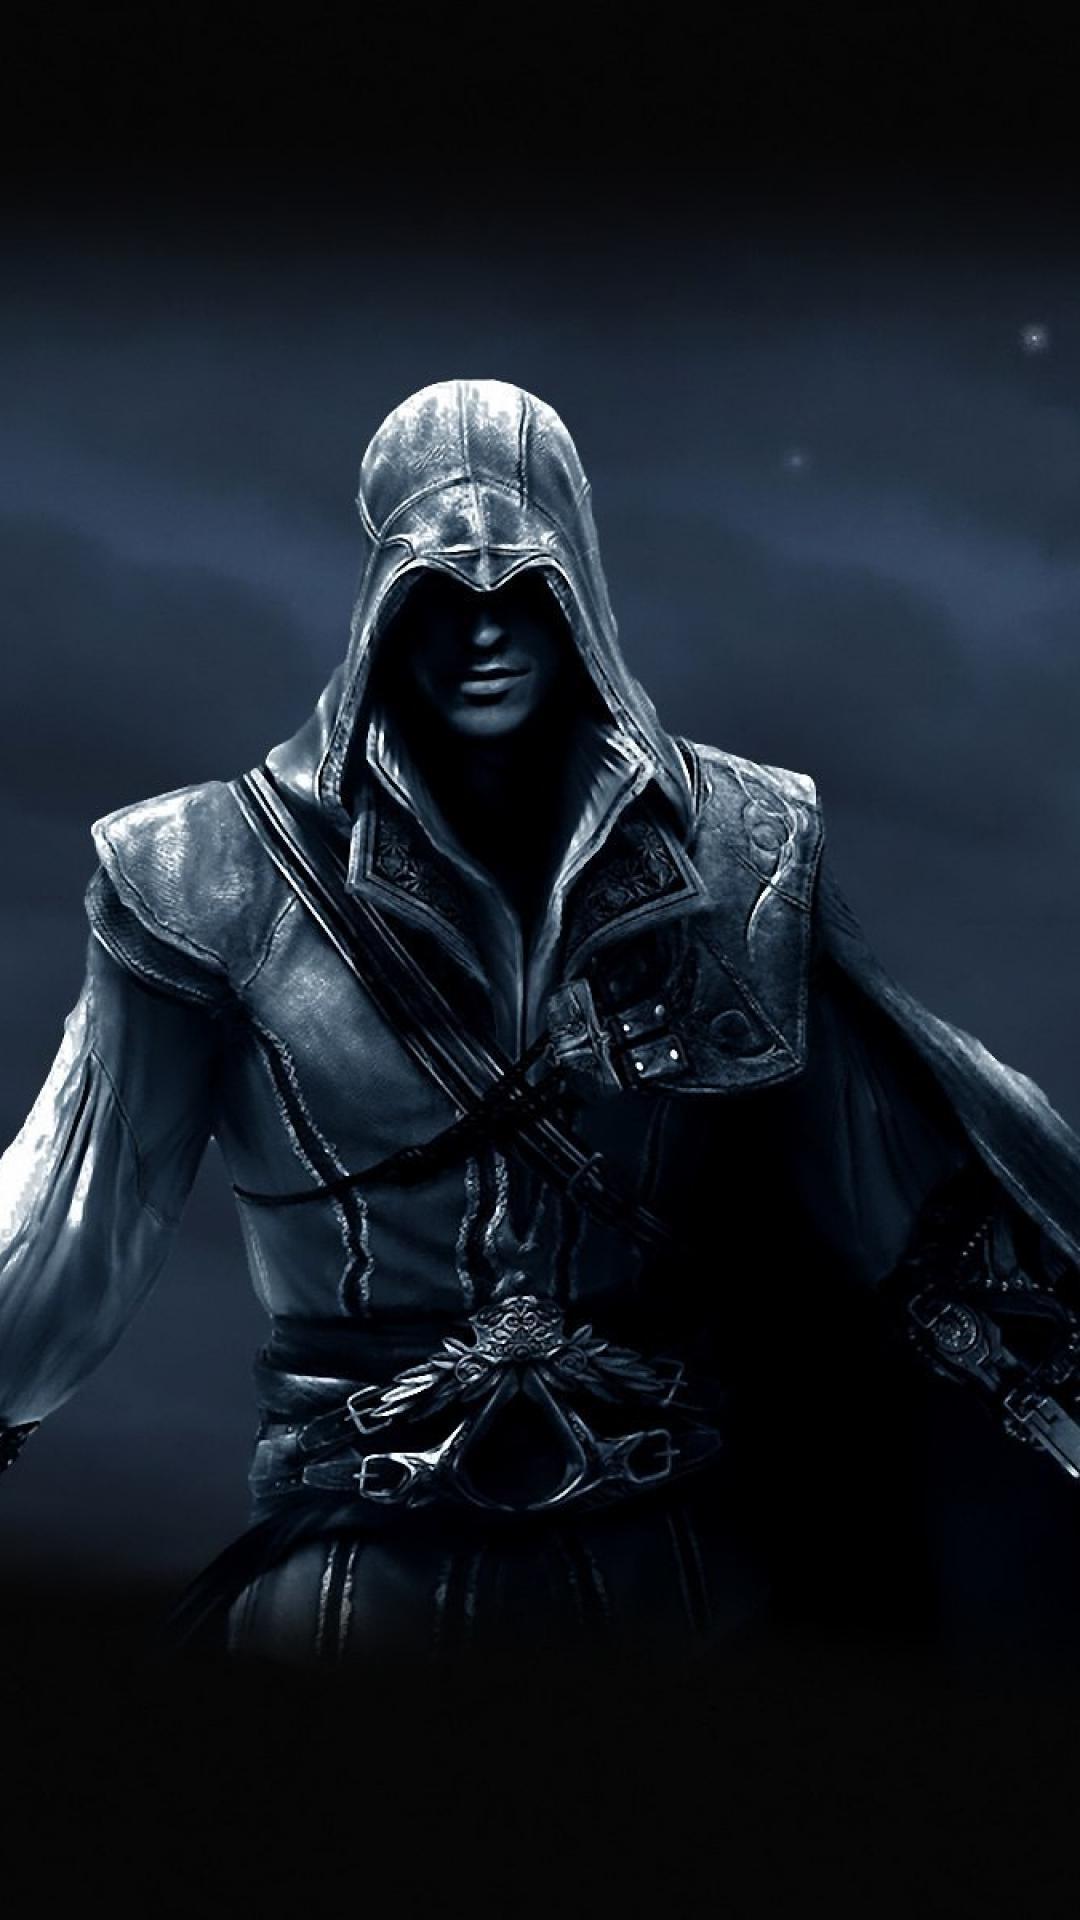 11 Assassin's Creed Live Wallpapers, Animated Wallpapers - MoeWalls